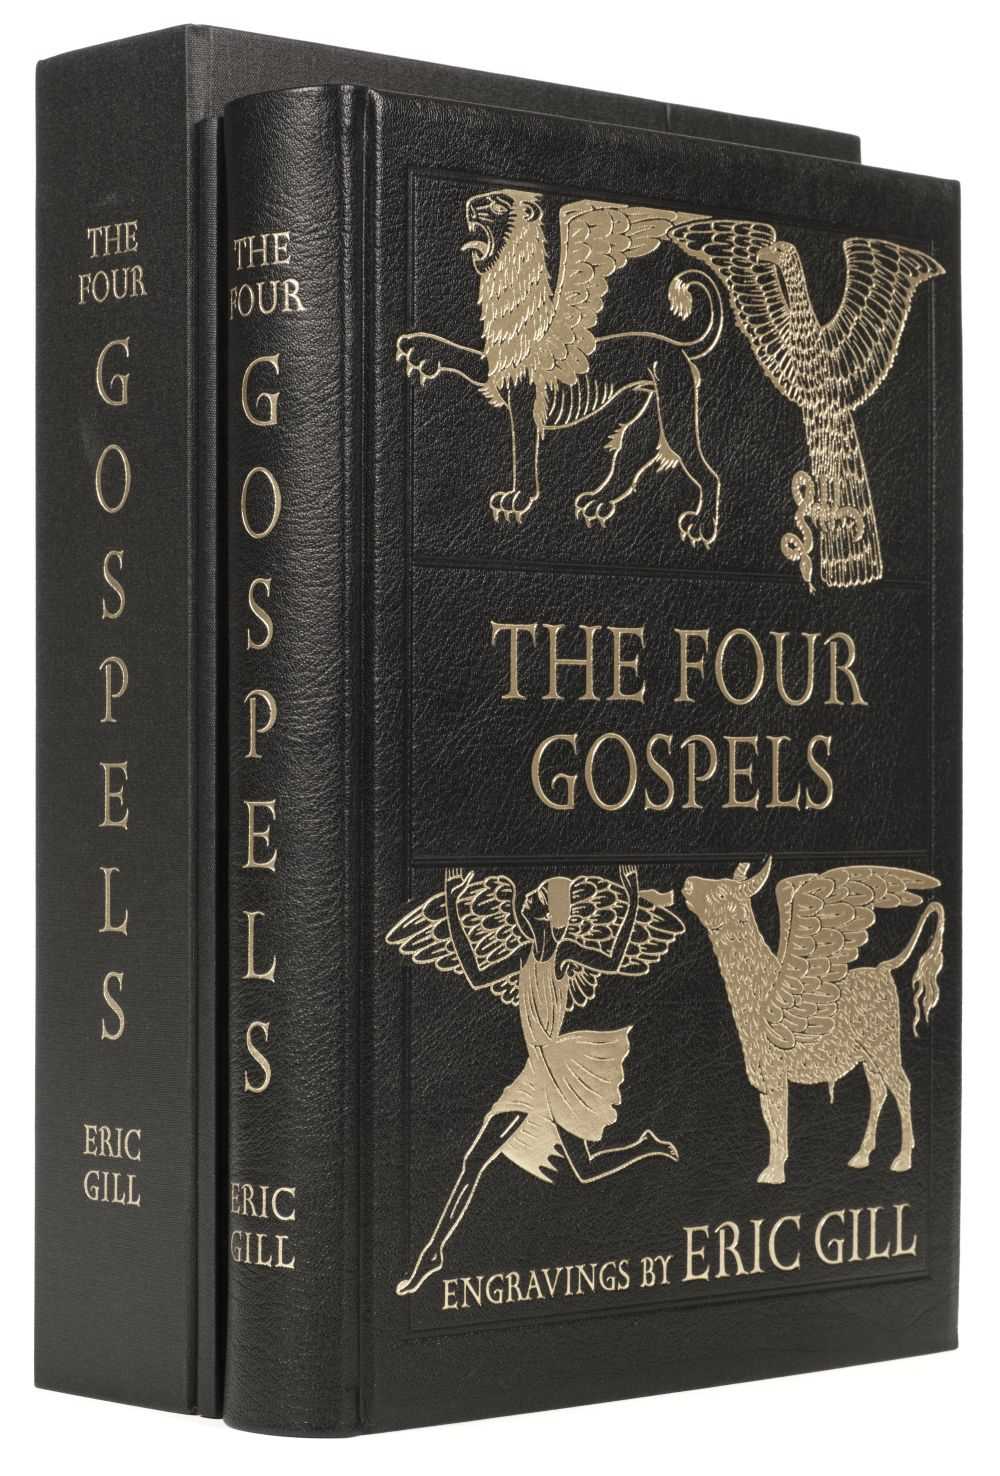 Lot 573 - Folio Society. The Four Gospels of the Lord Jesus Christ, limited (facsimile) edition, 2007